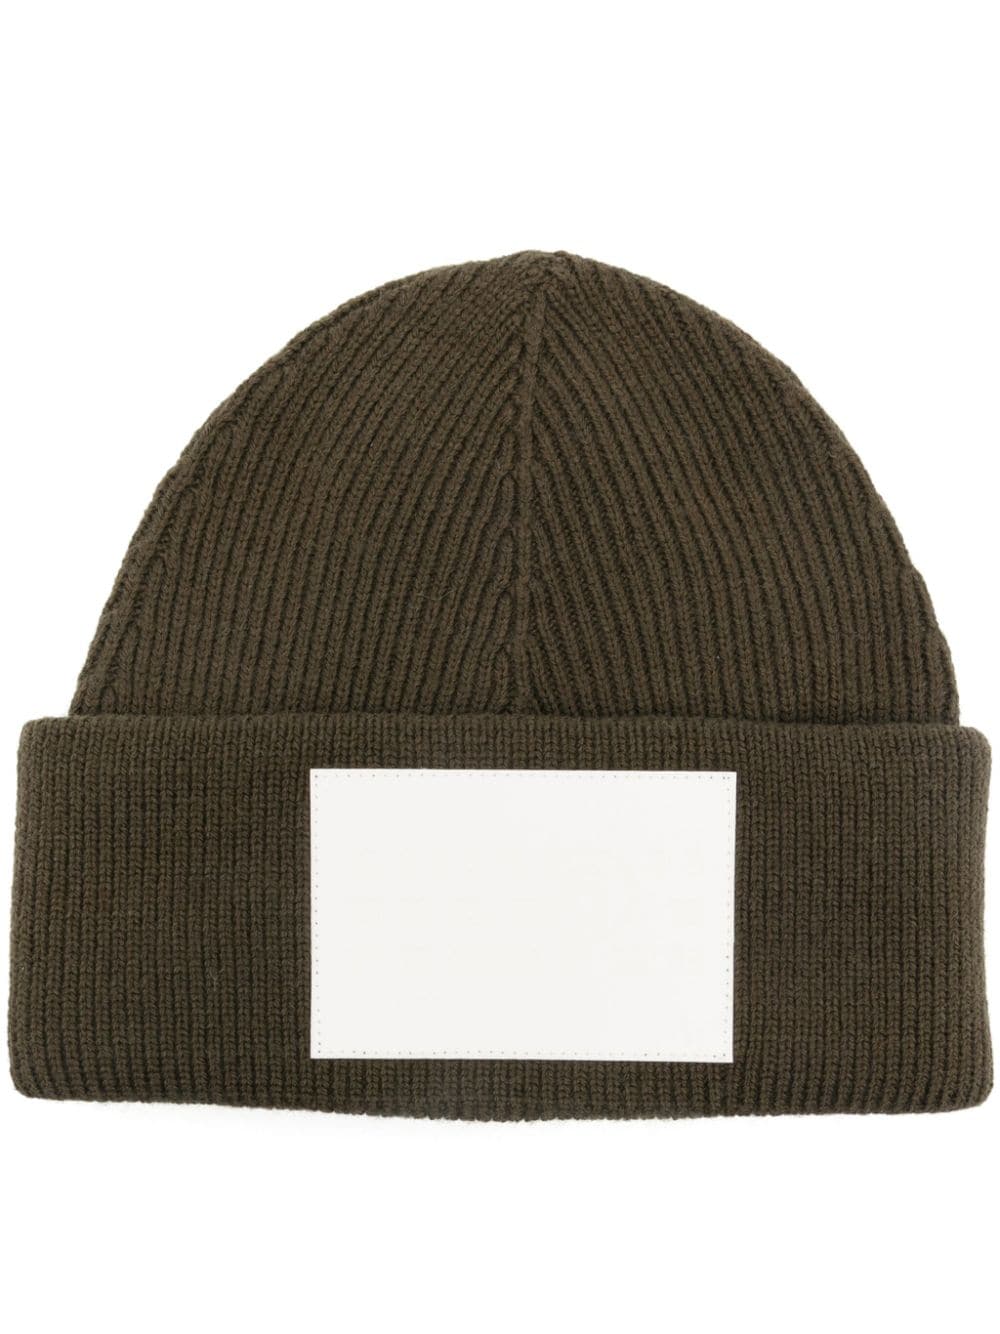 numbers-motif knitted beanie